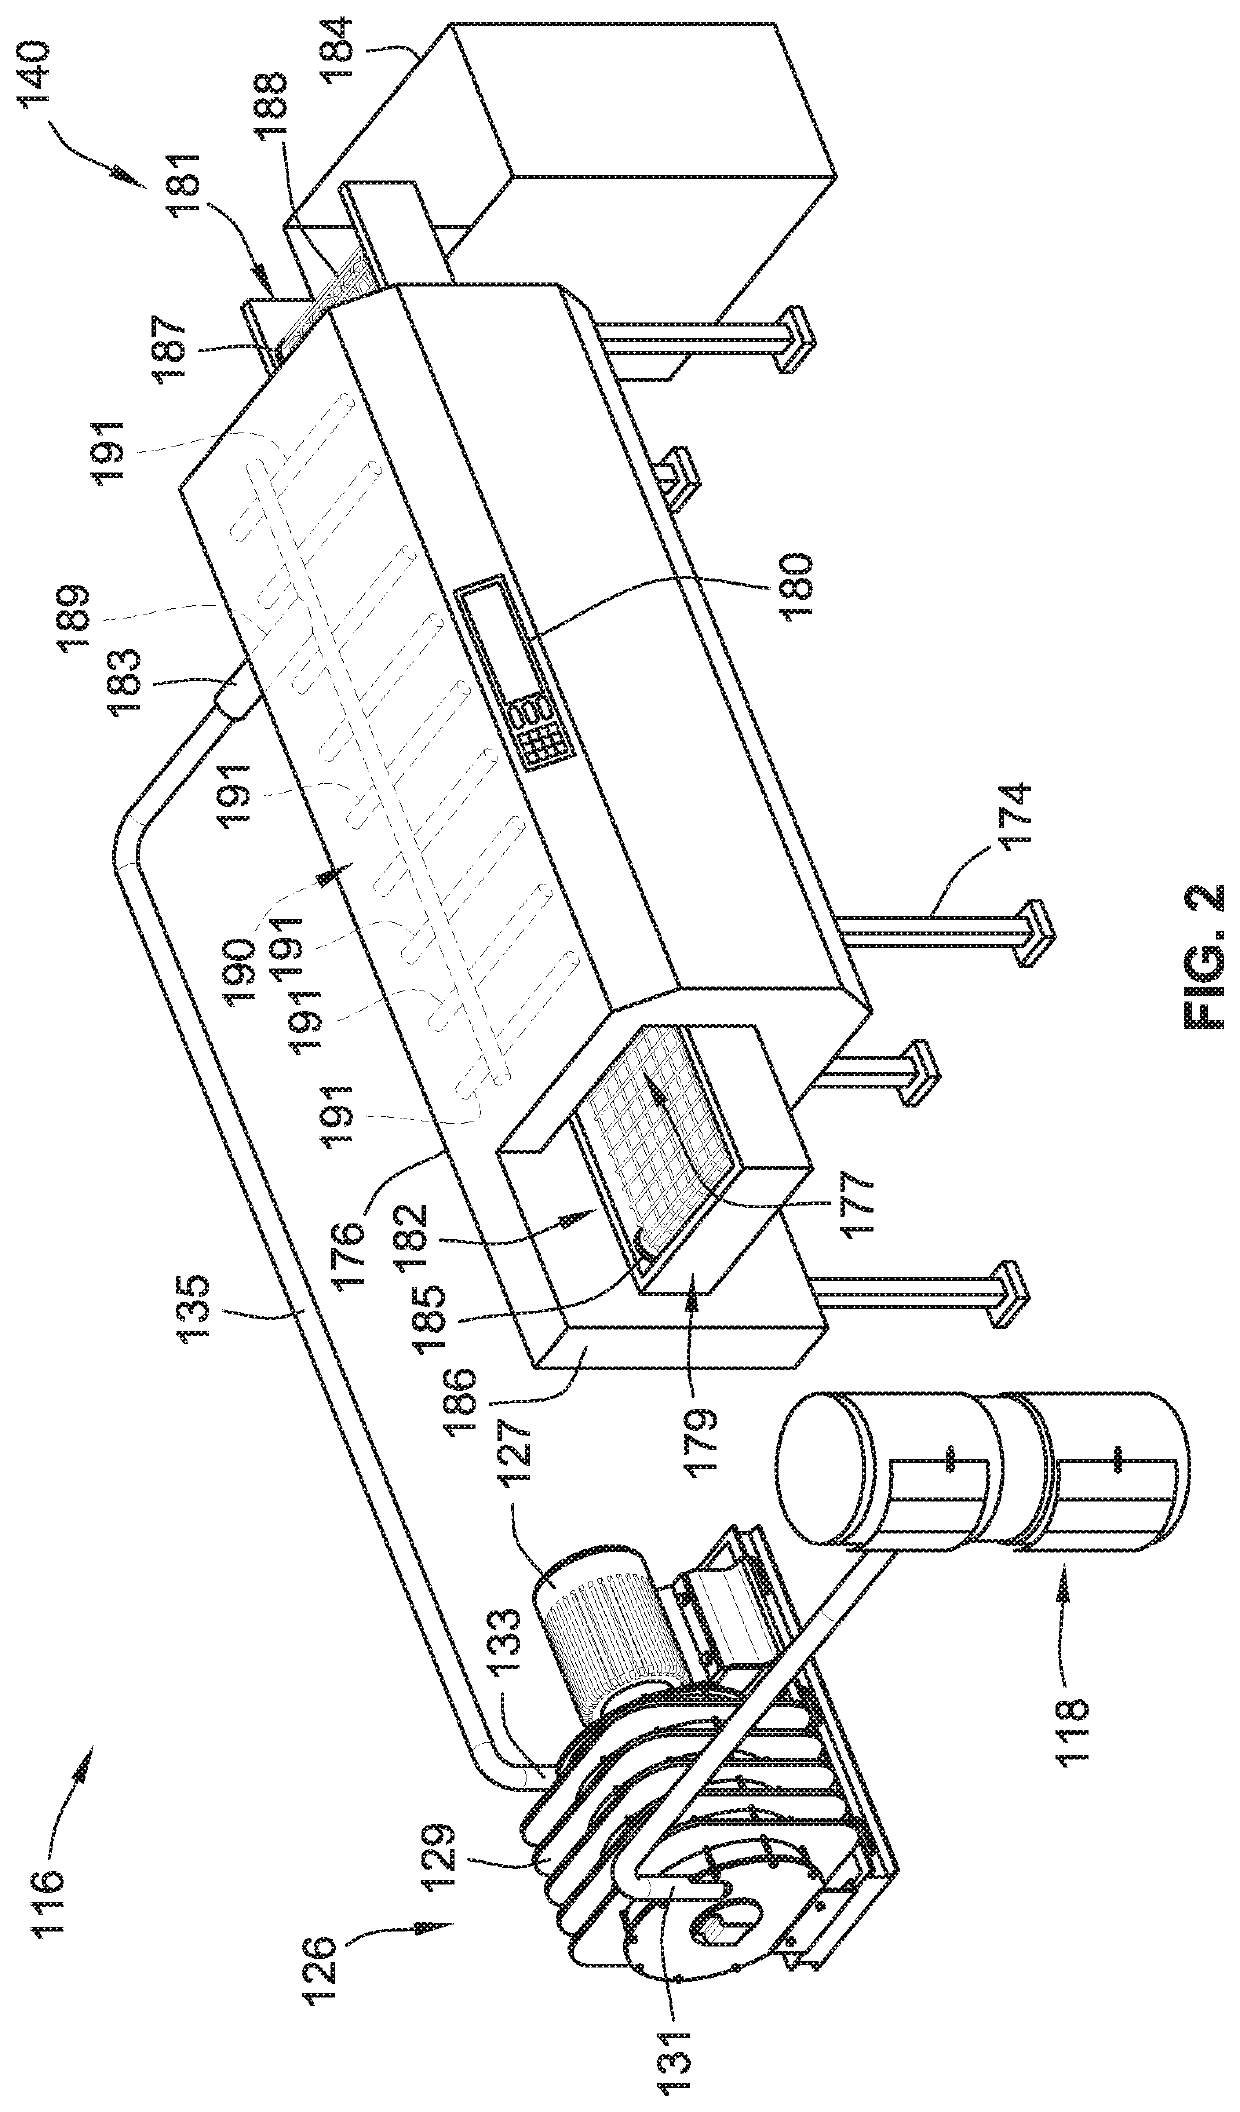 Systems, methods, and devices for exahust recirculation of vehicle wash vacuums